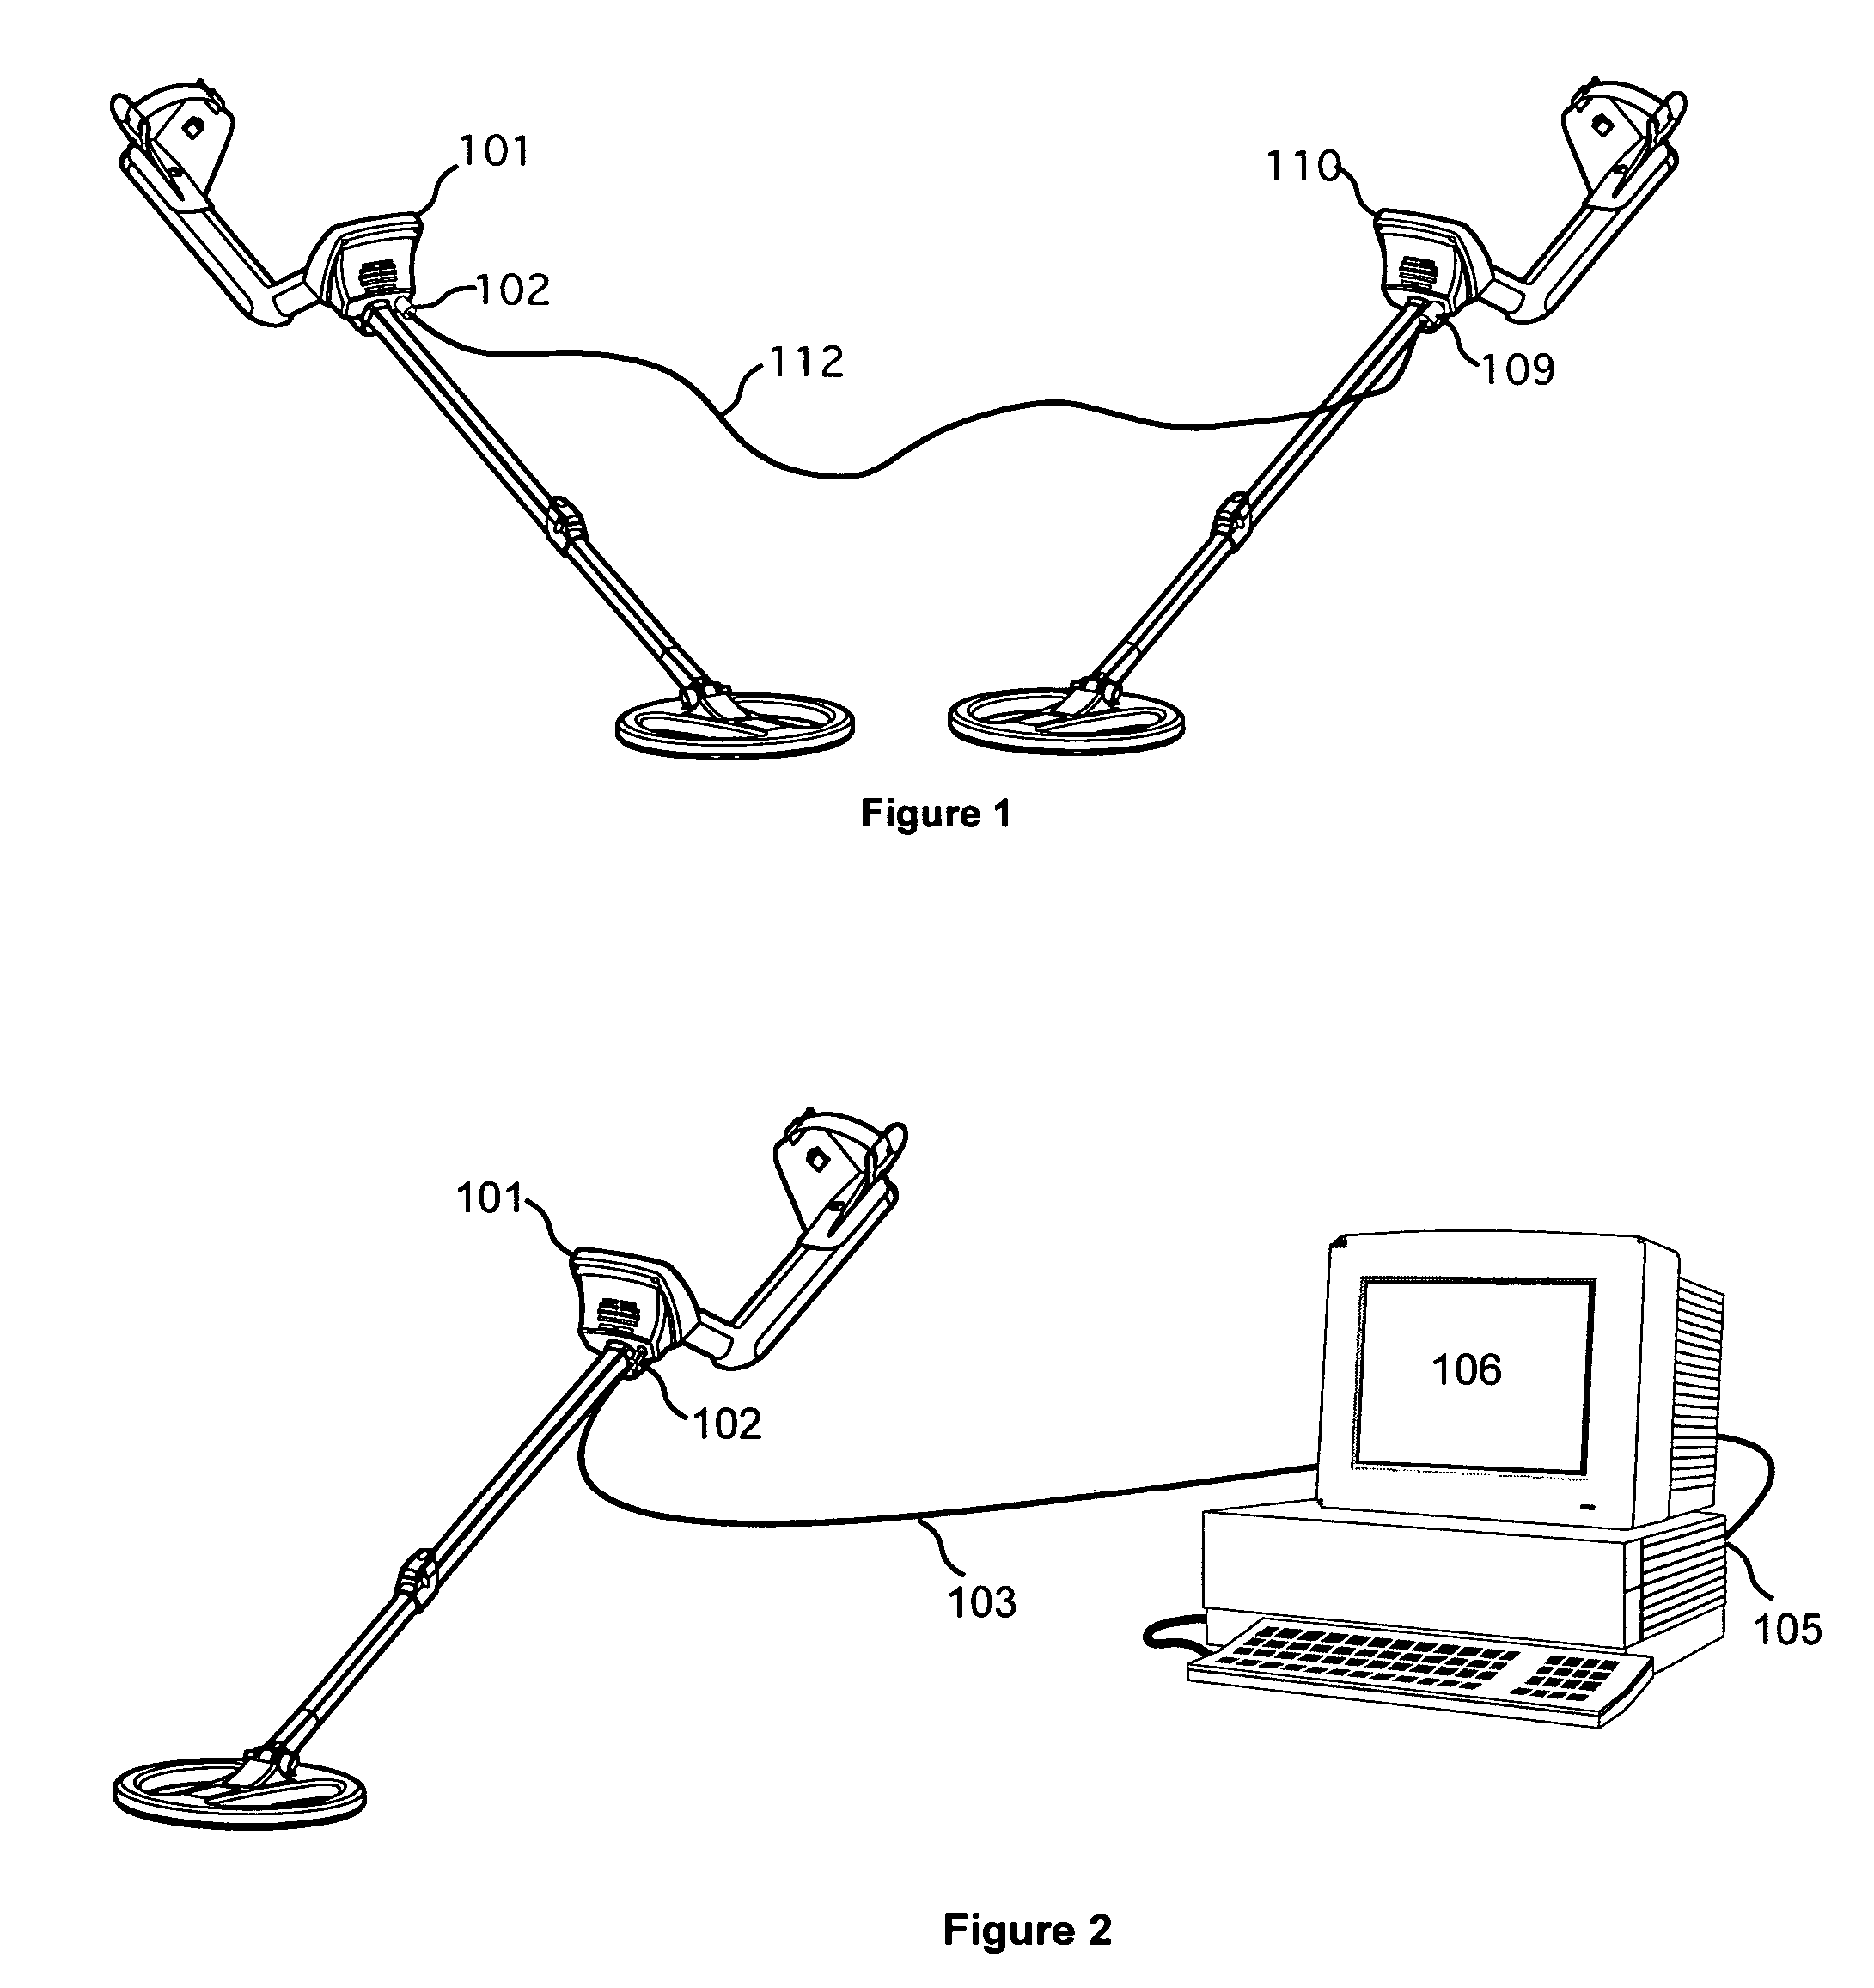 Metal detector with data transfer